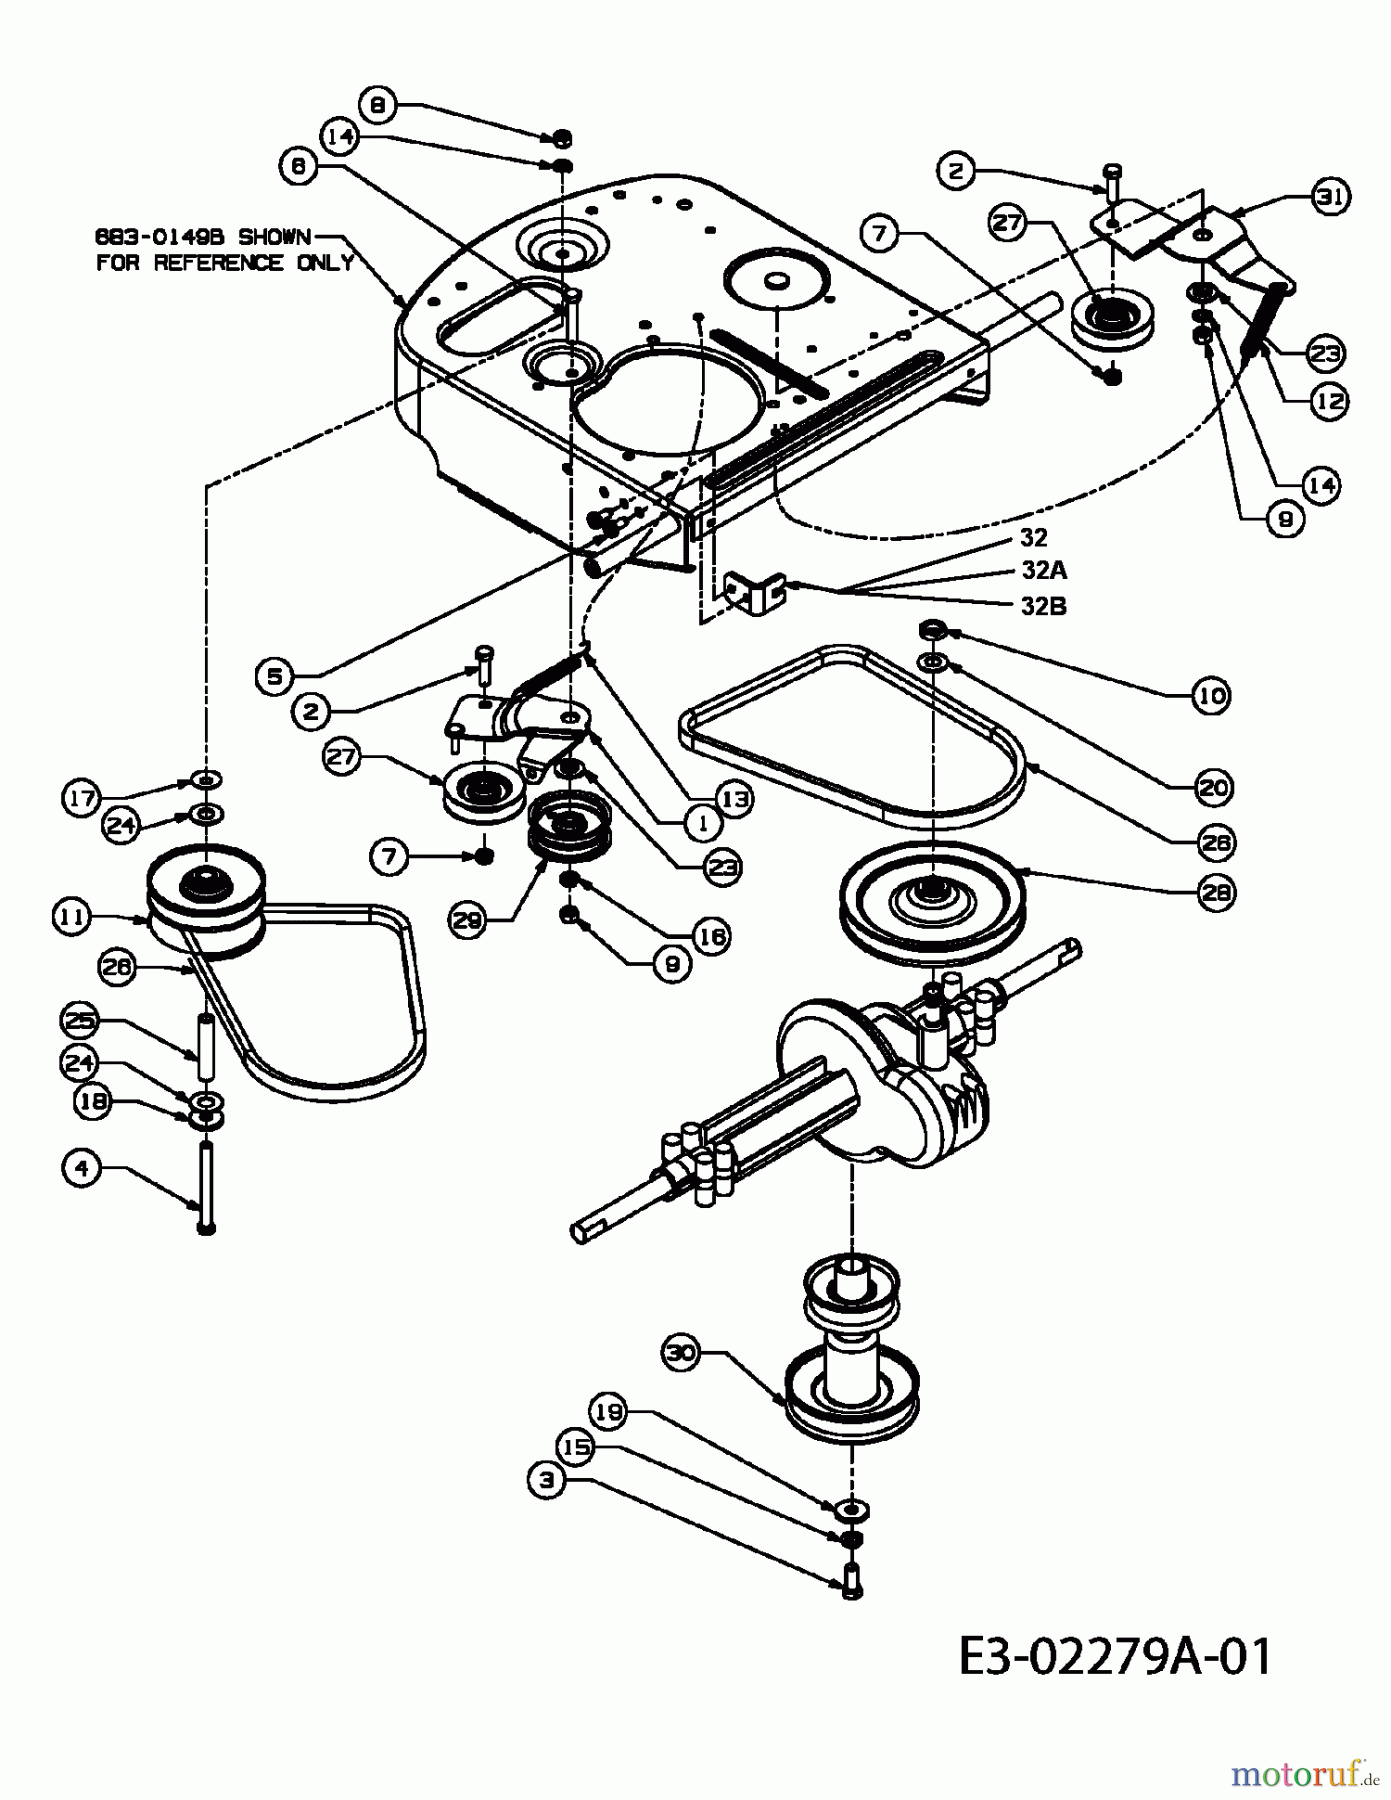  Lawnflite Lawn tractors 503 13B-332-611  (2005) Drive system, Engine pulley